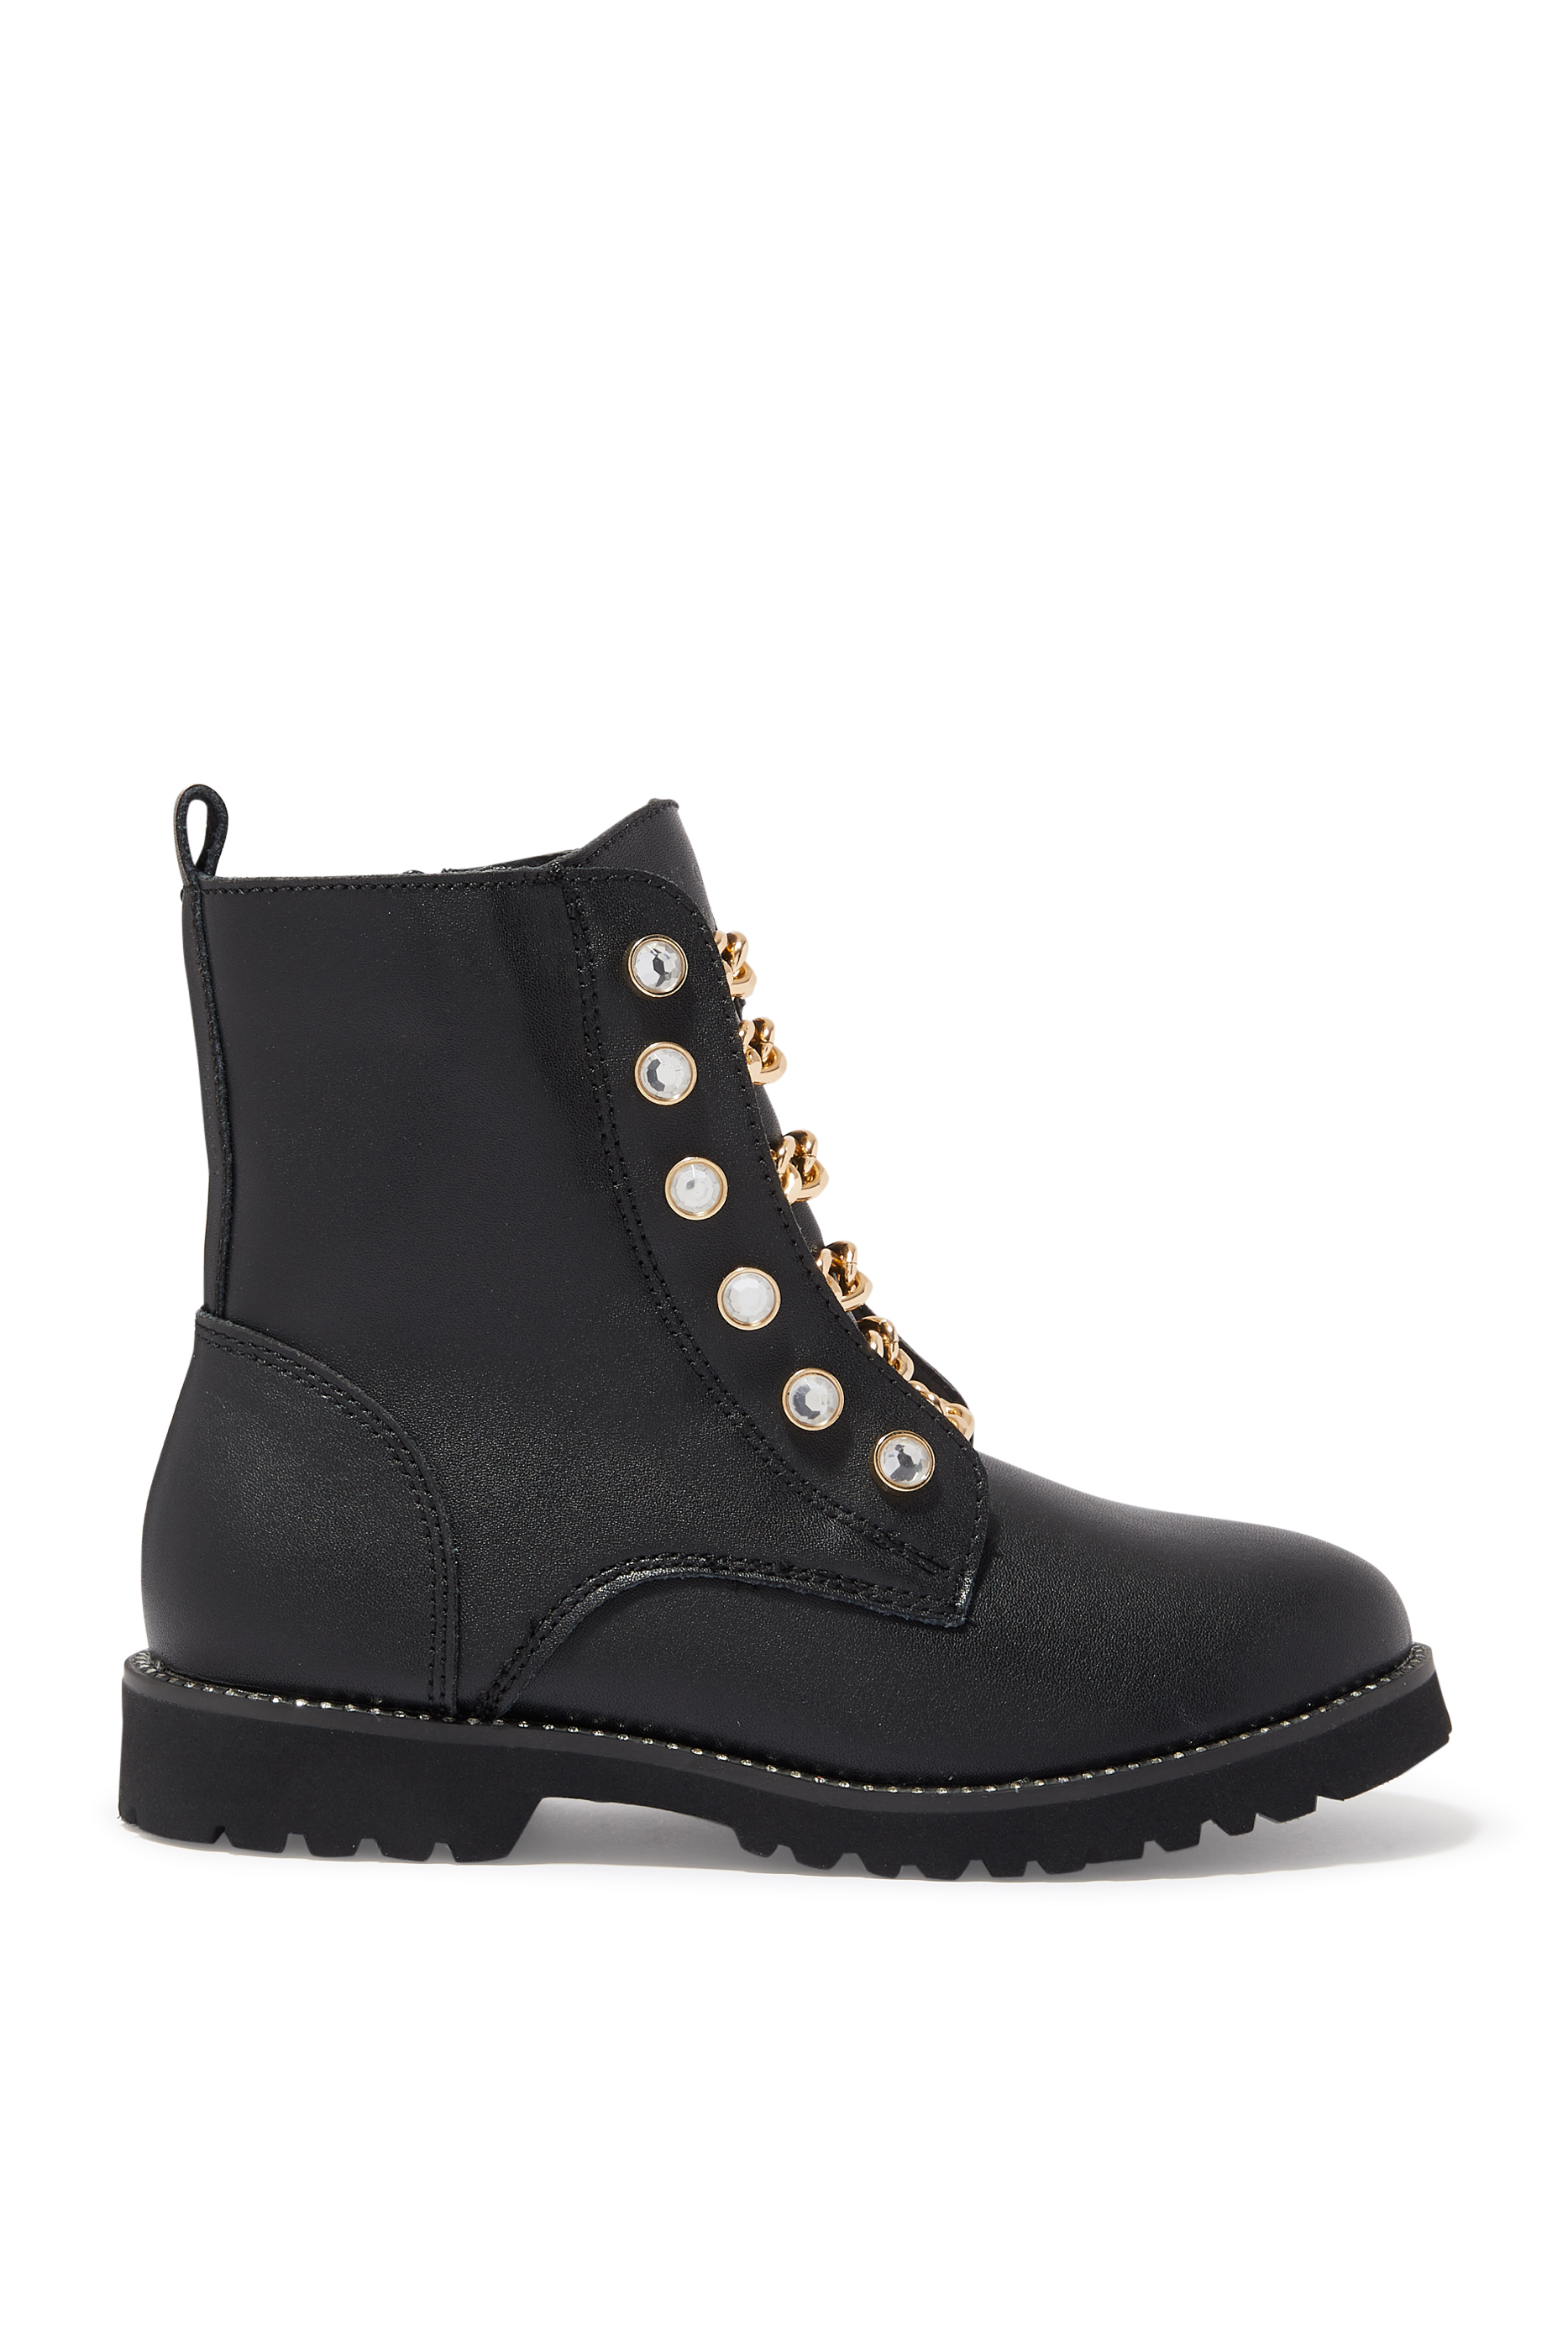 Buy Kurt Geiger Kids Bax 50 Leather Ankle Boots for Girl | Bloomingdale ...